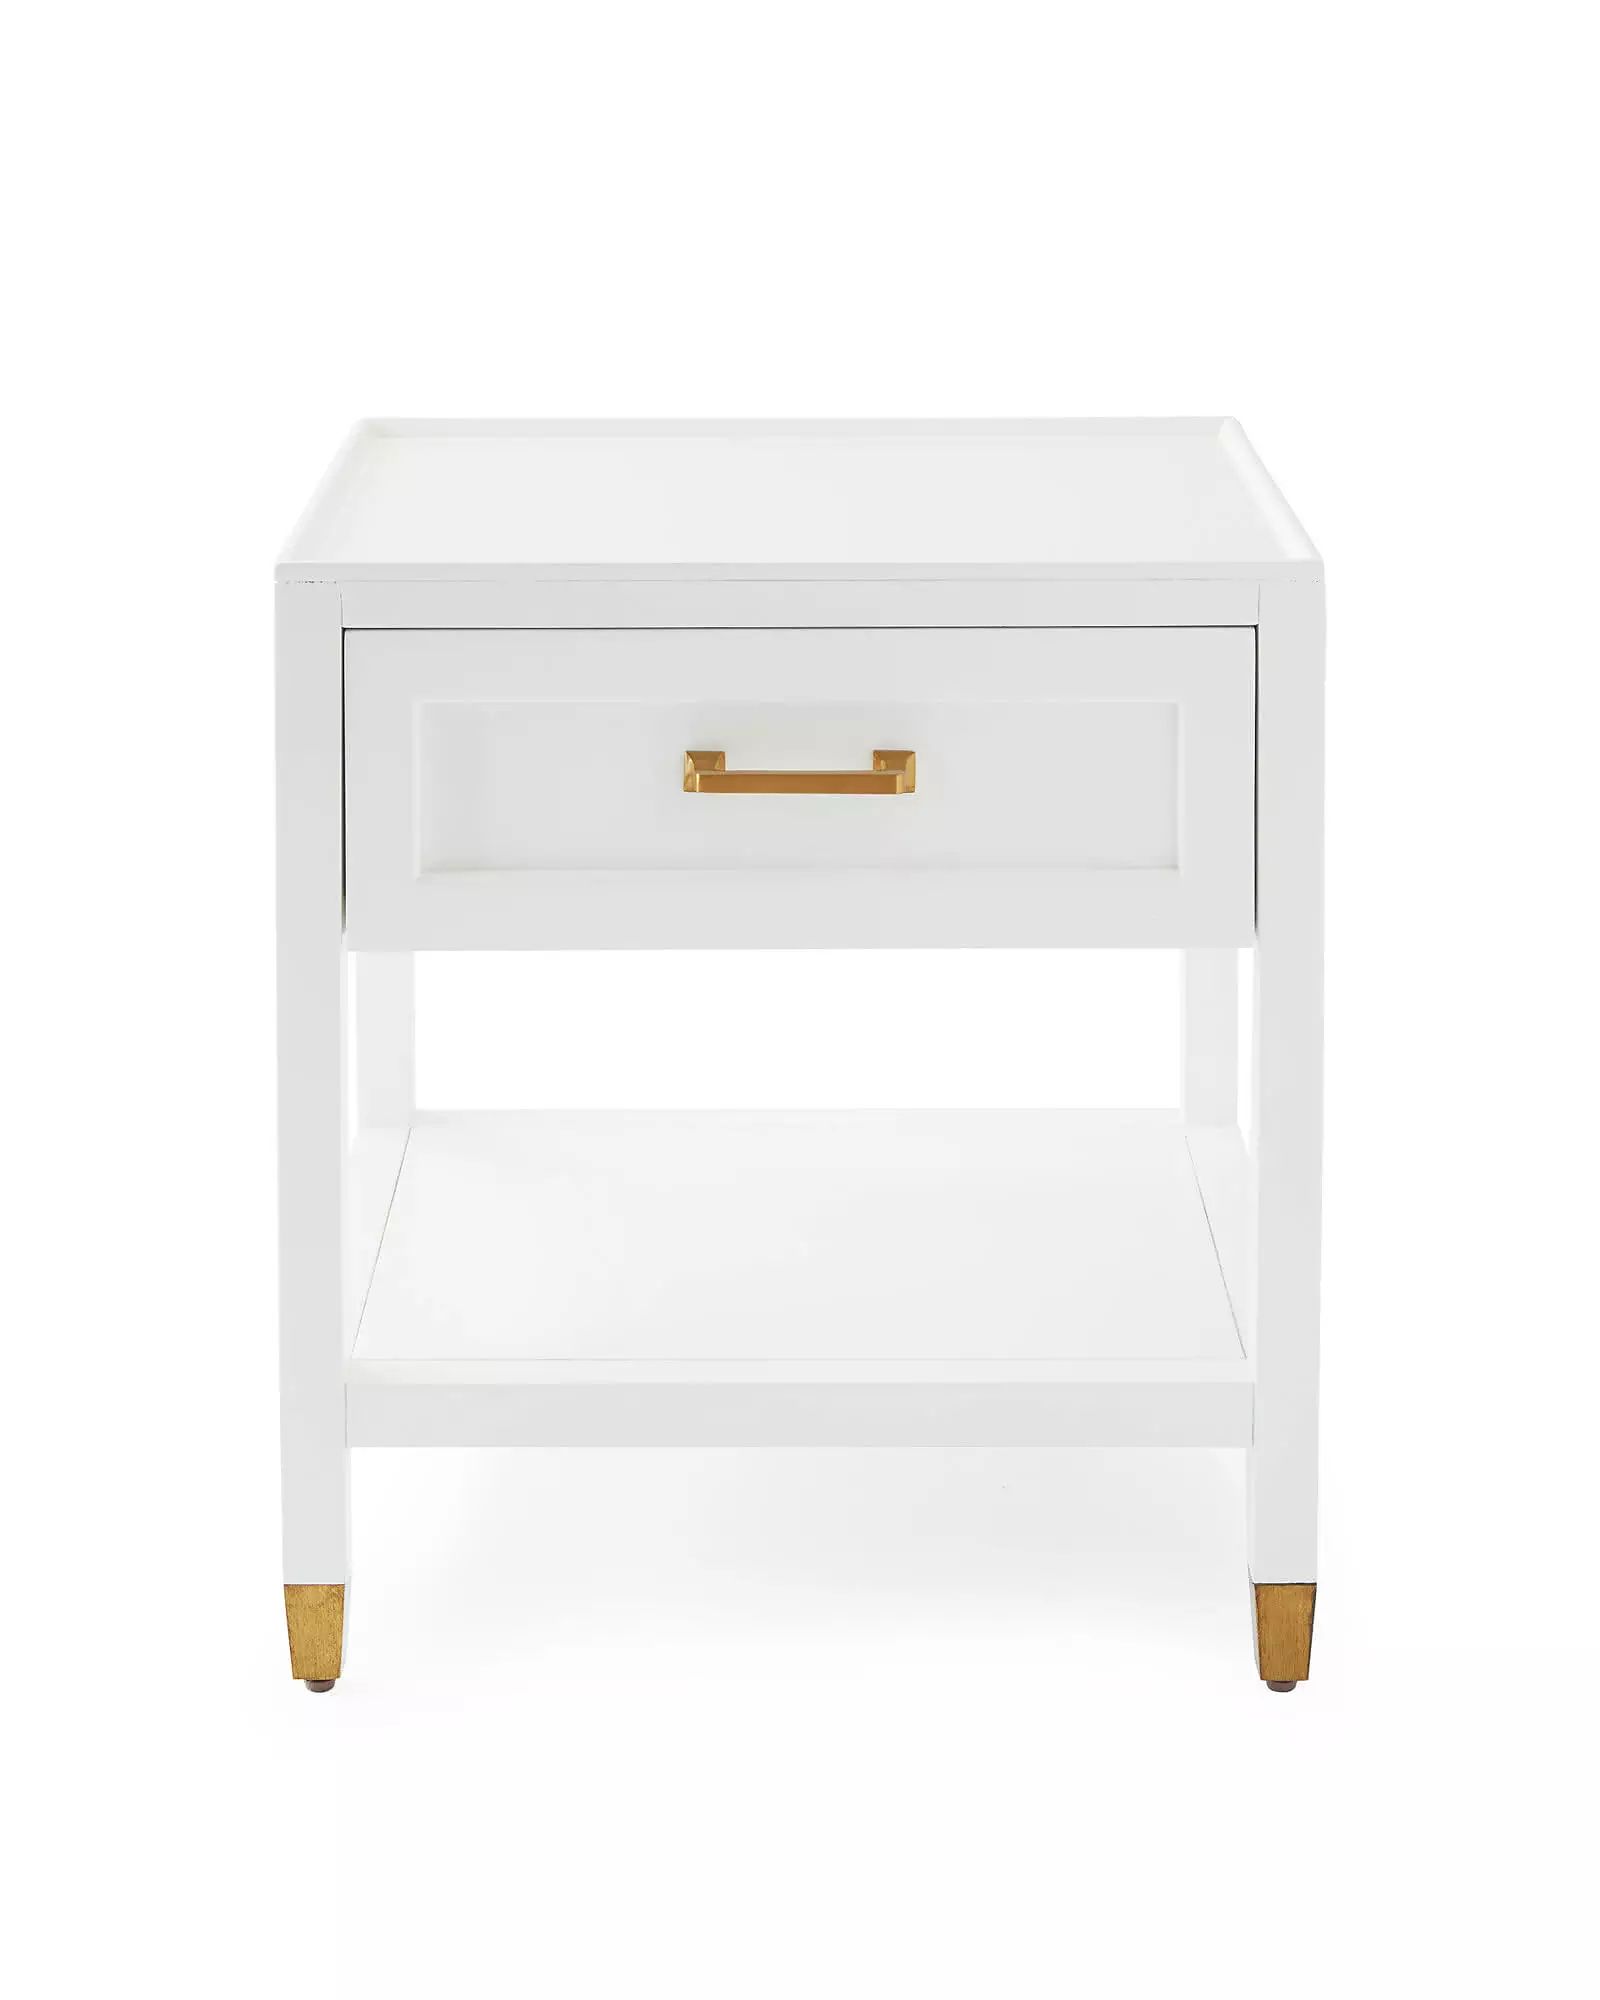 Pierson Nightstand | Serena and Lily